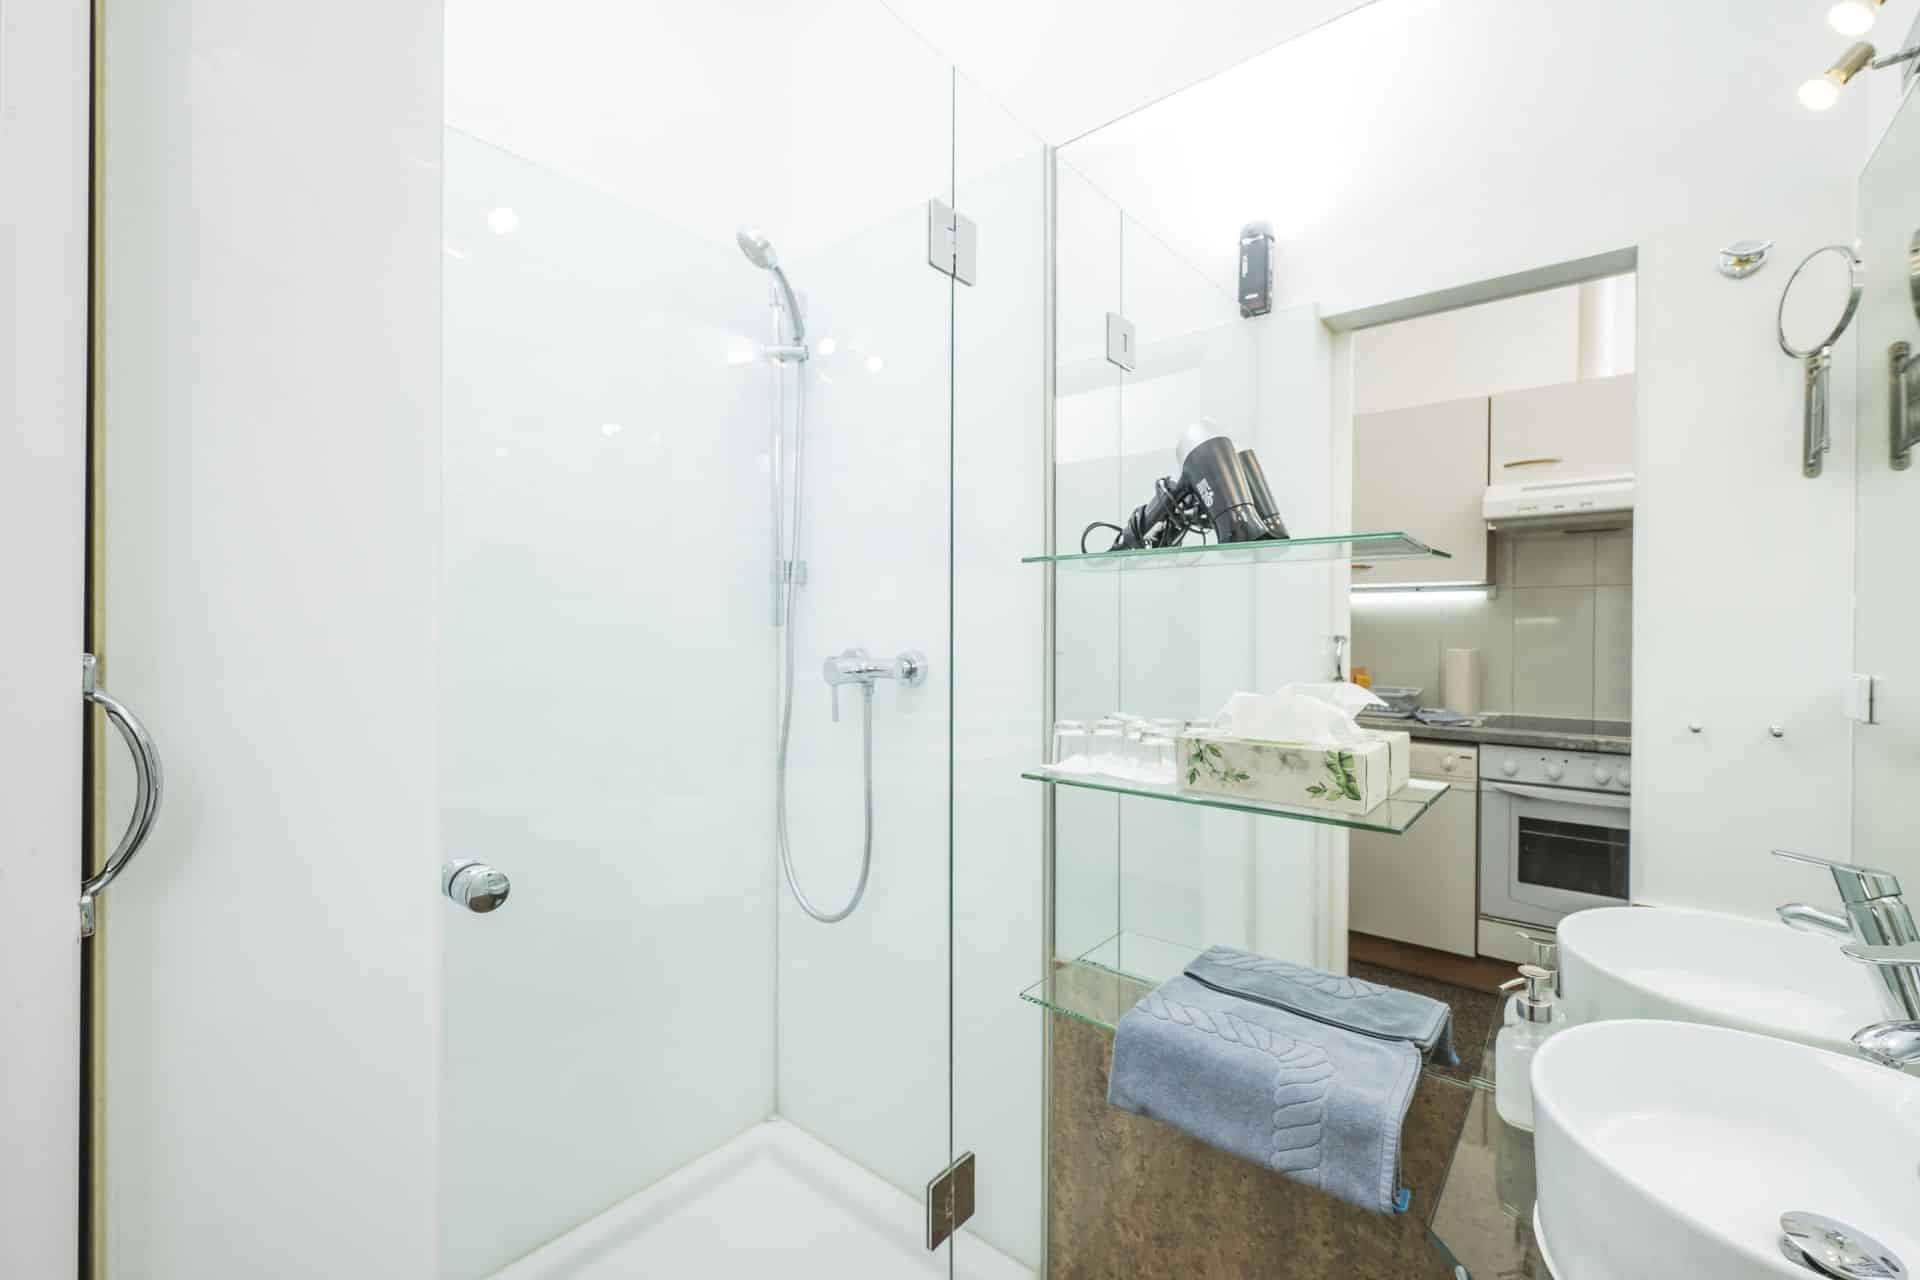 Apartment 8 bathroom with shower